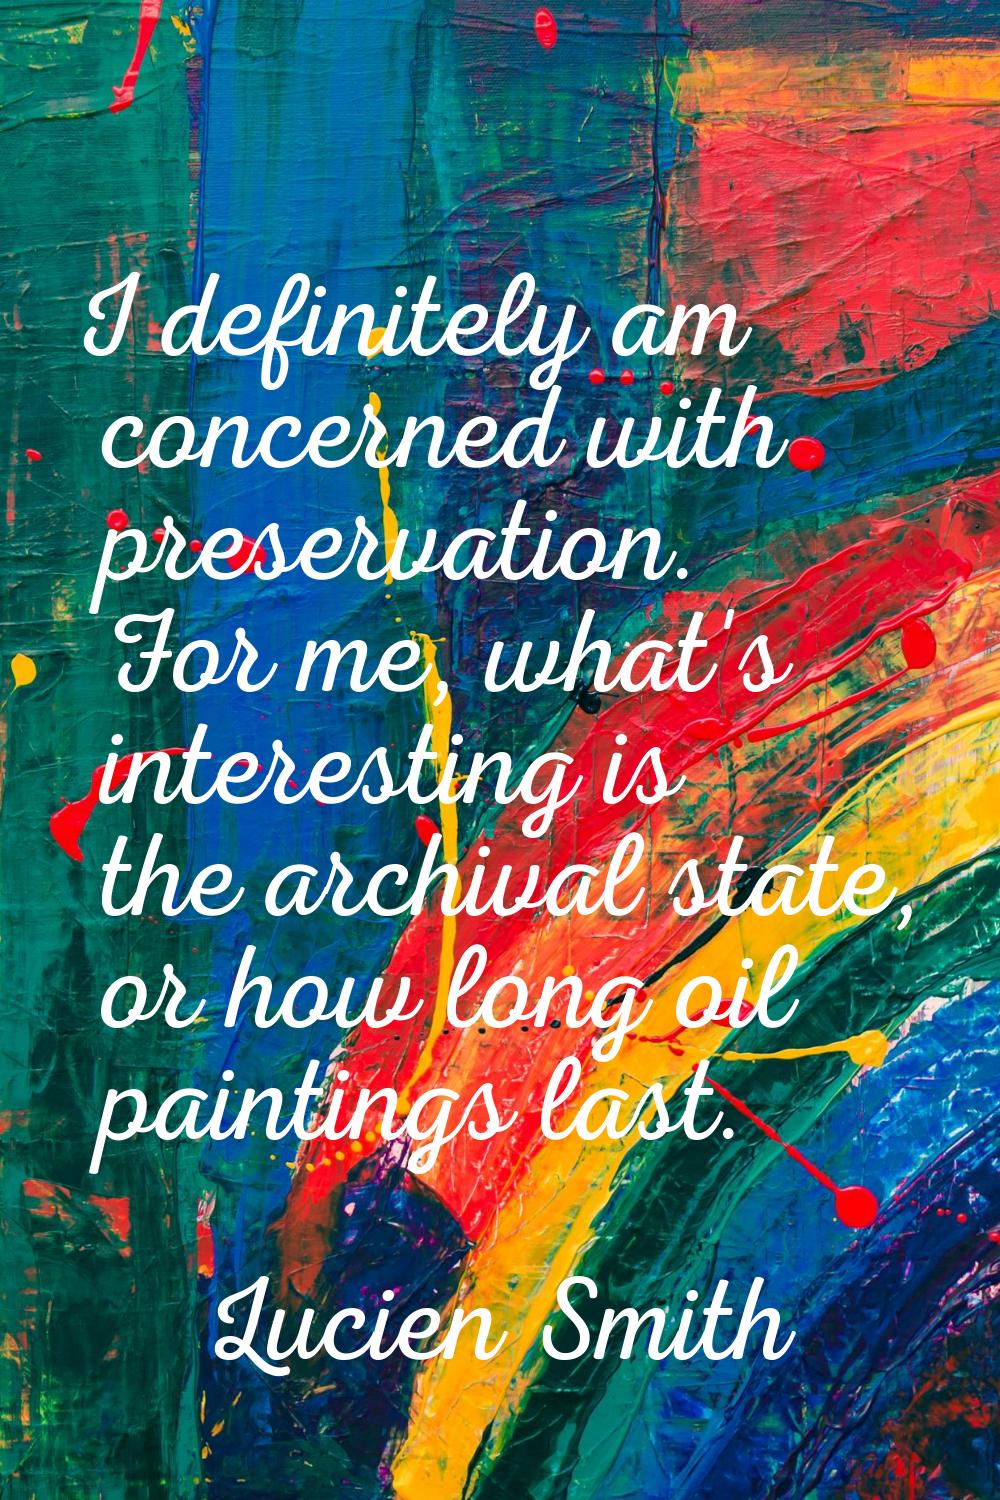 I definitely am concerned with preservation. For me, what's interesting is the archival state, or h